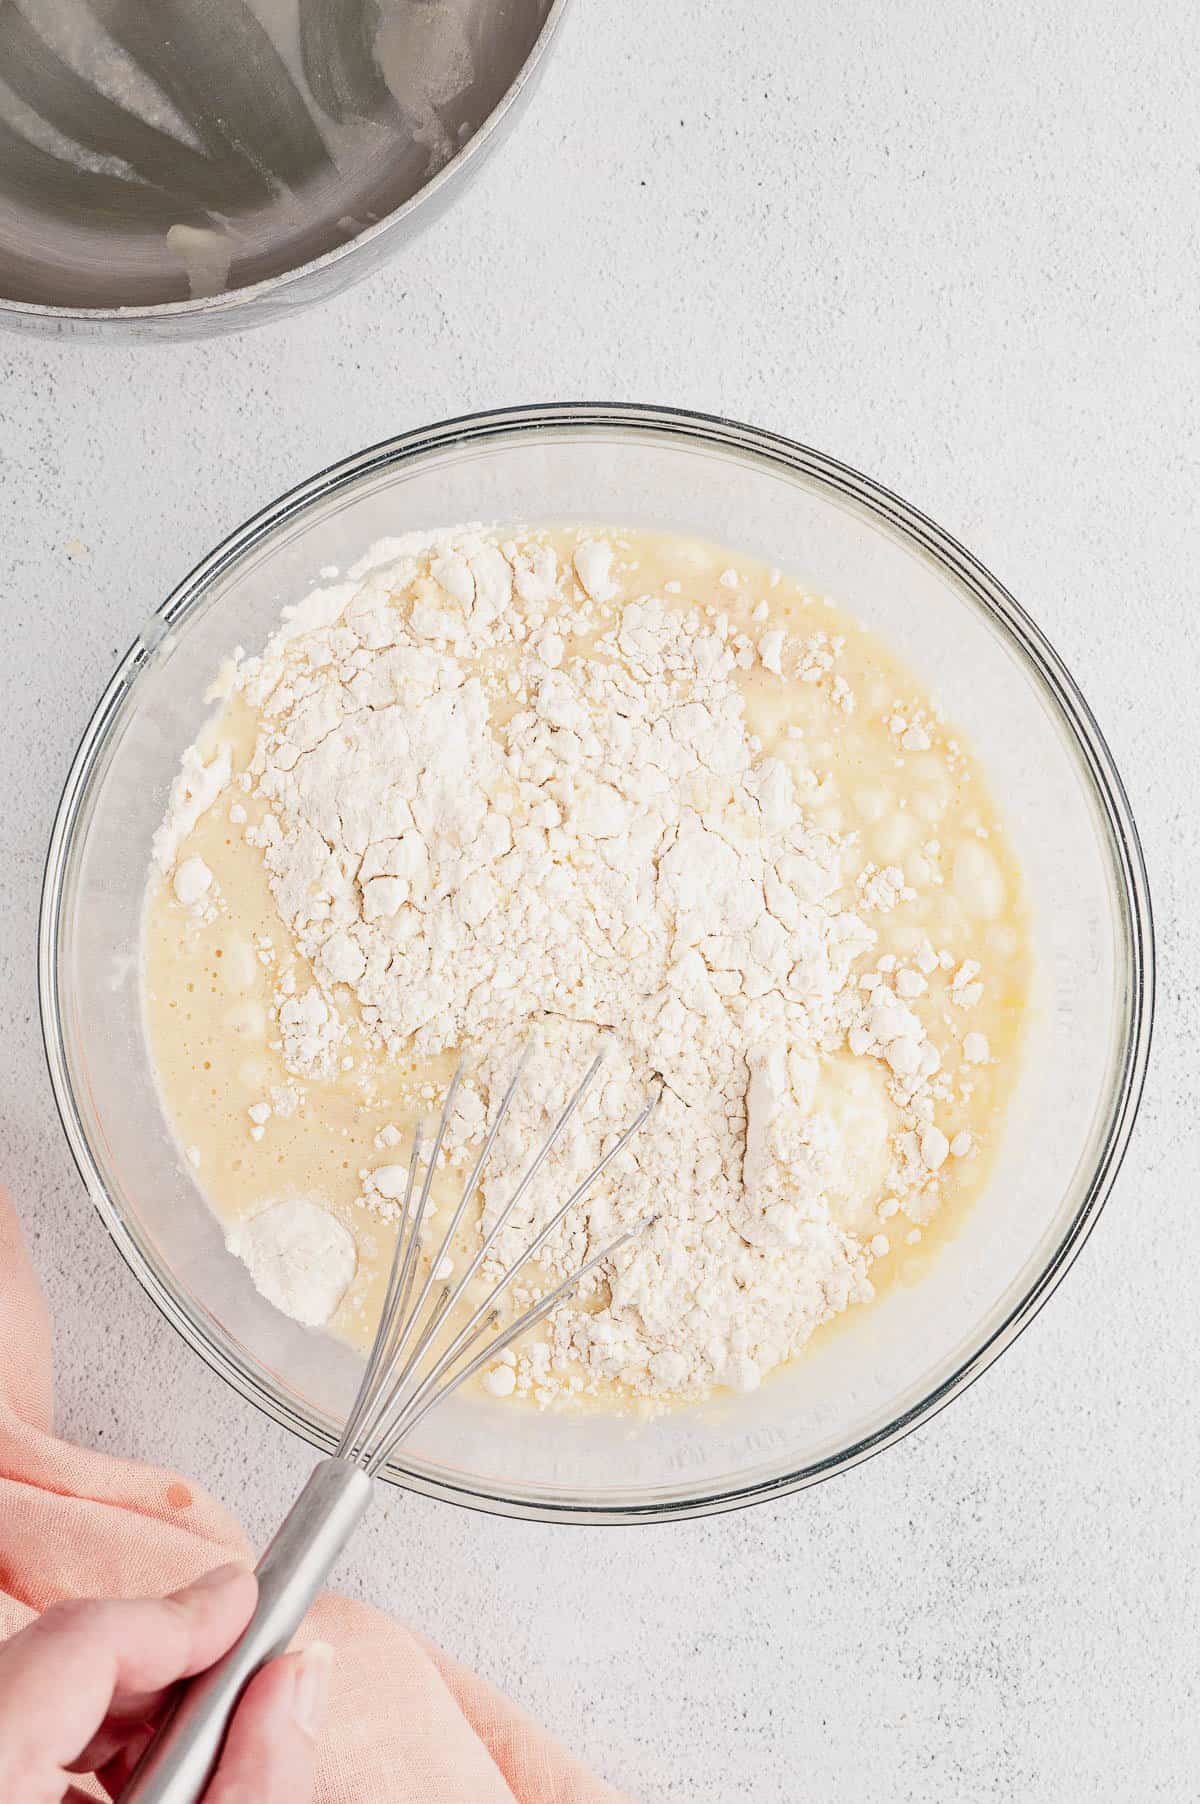 Flour is added into a bowl of cinnamon roll batter.